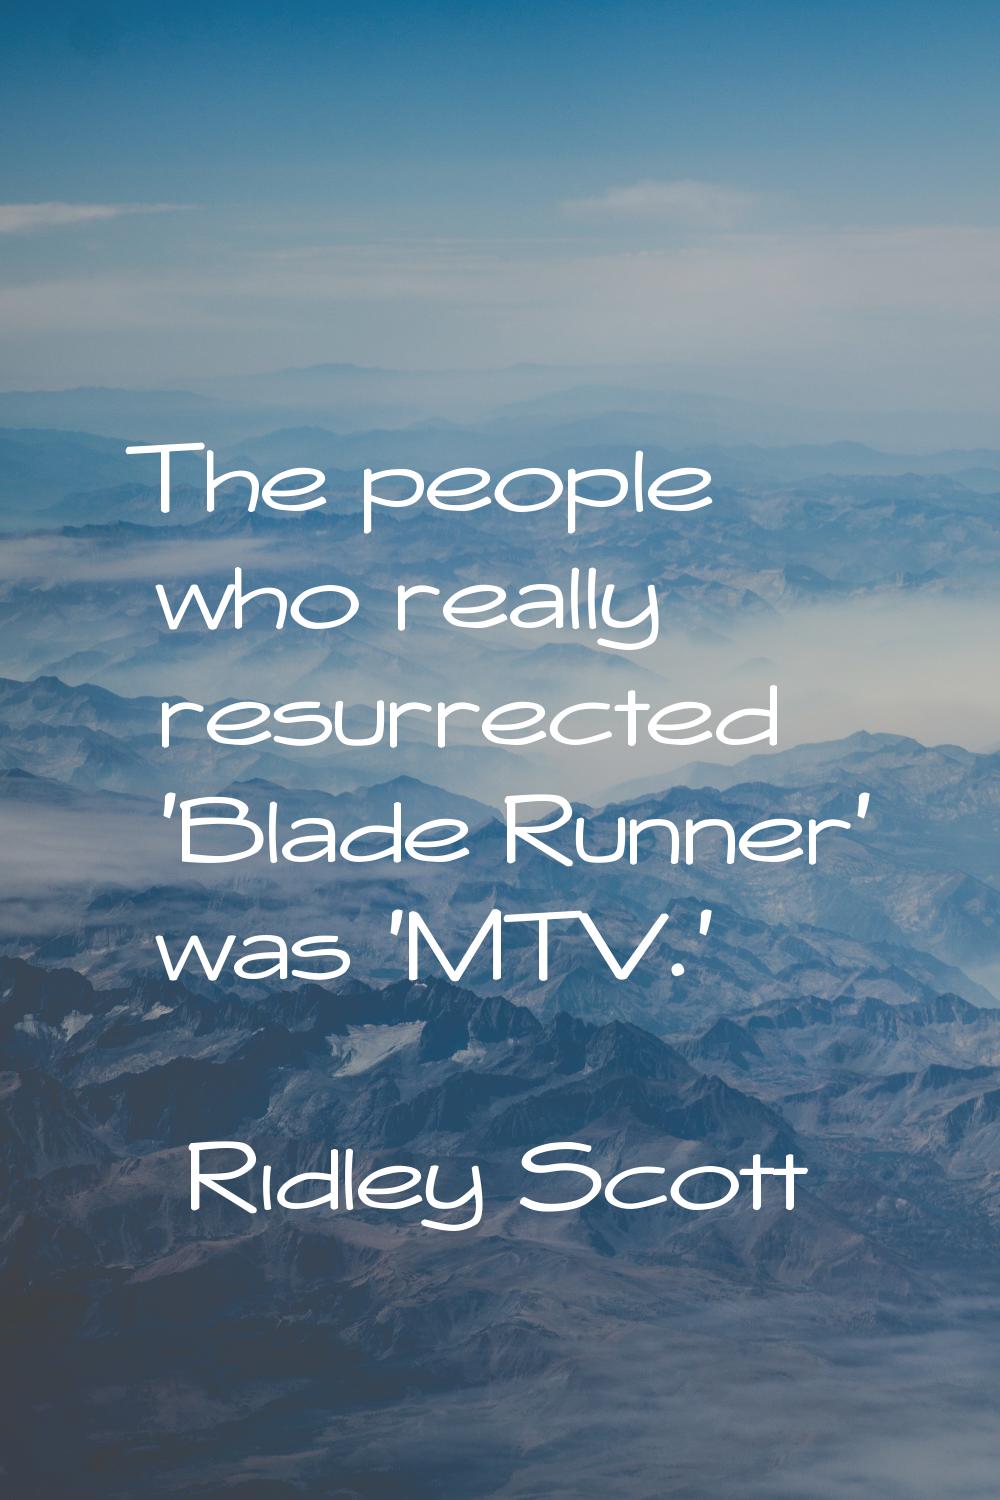 The people who really resurrected 'Blade Runner' was 'MTV.'